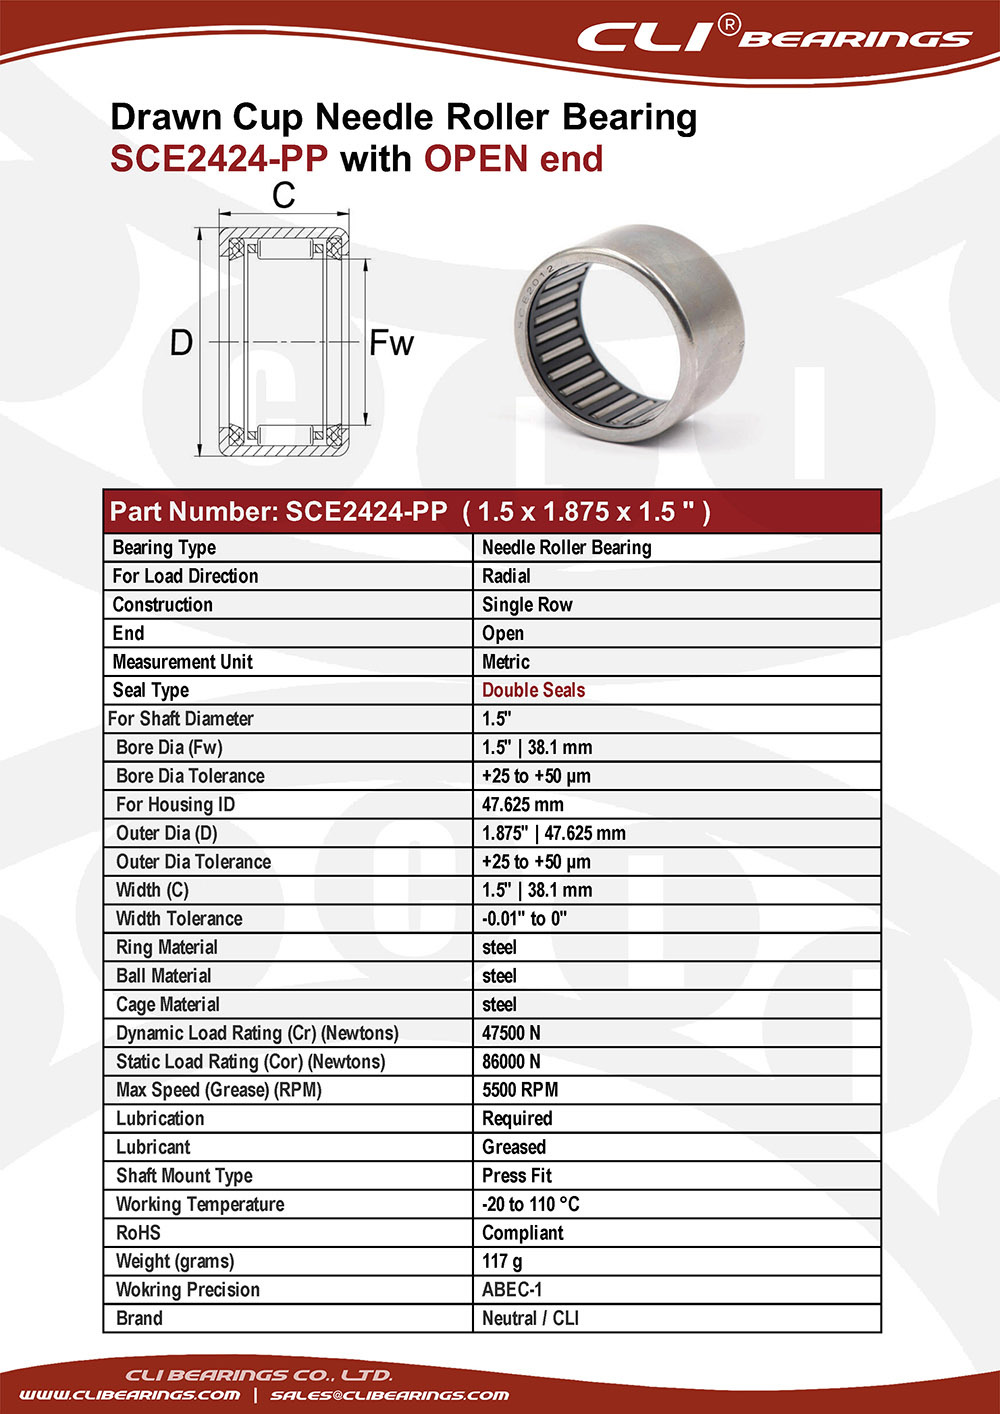 Original sce2424 pp 1 5x1 875x1 5 drawn cup needle roller bearings with double seals   cli bearings co ltd  nw